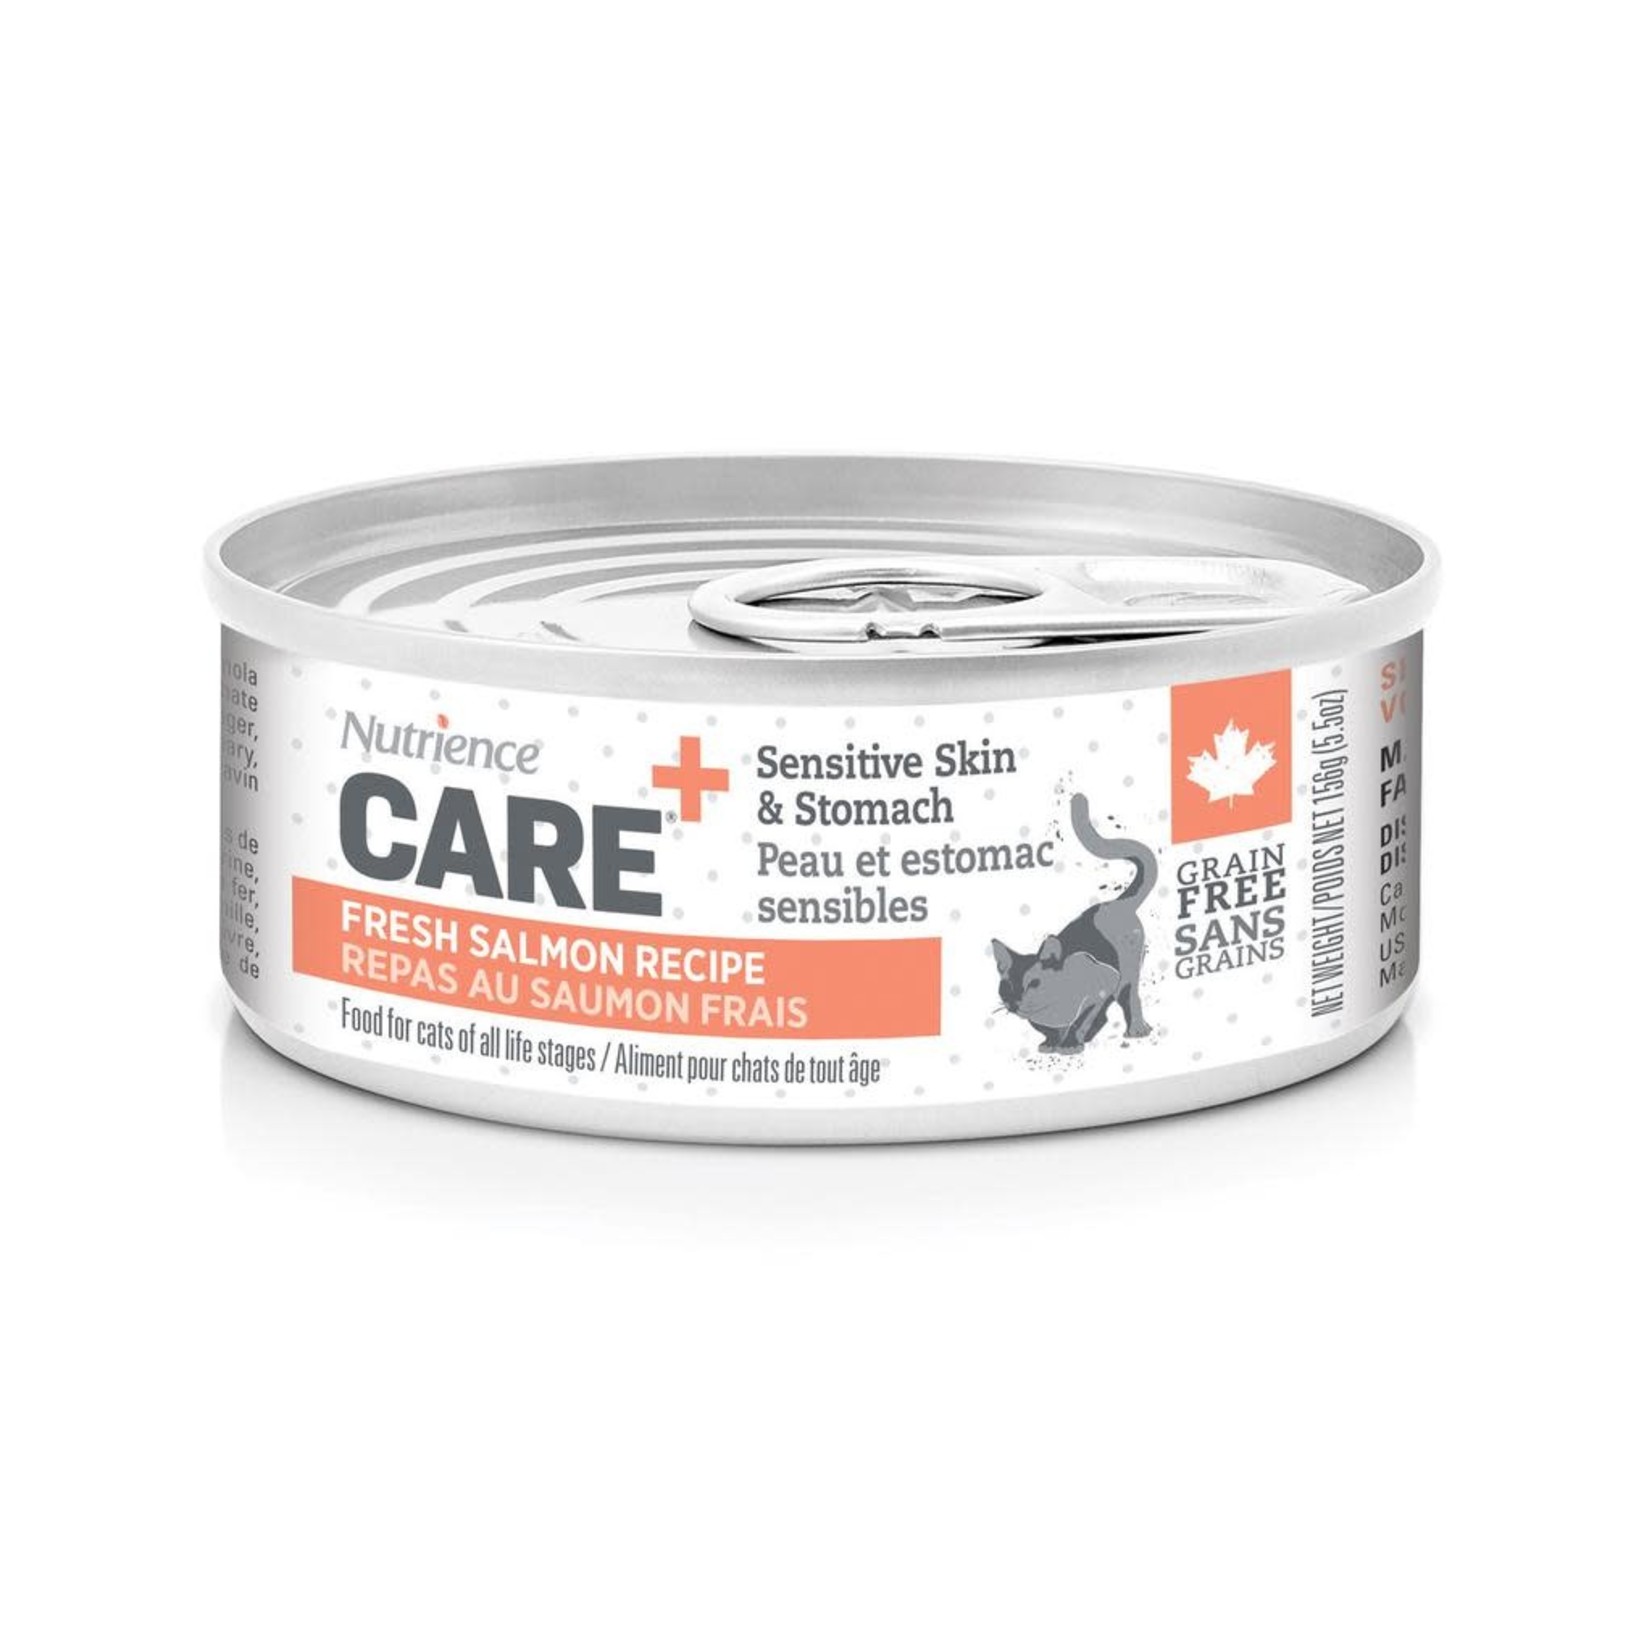 NUTRIENCE Nutrience Care Cat Sensitive skin & Stomach Can, 156g